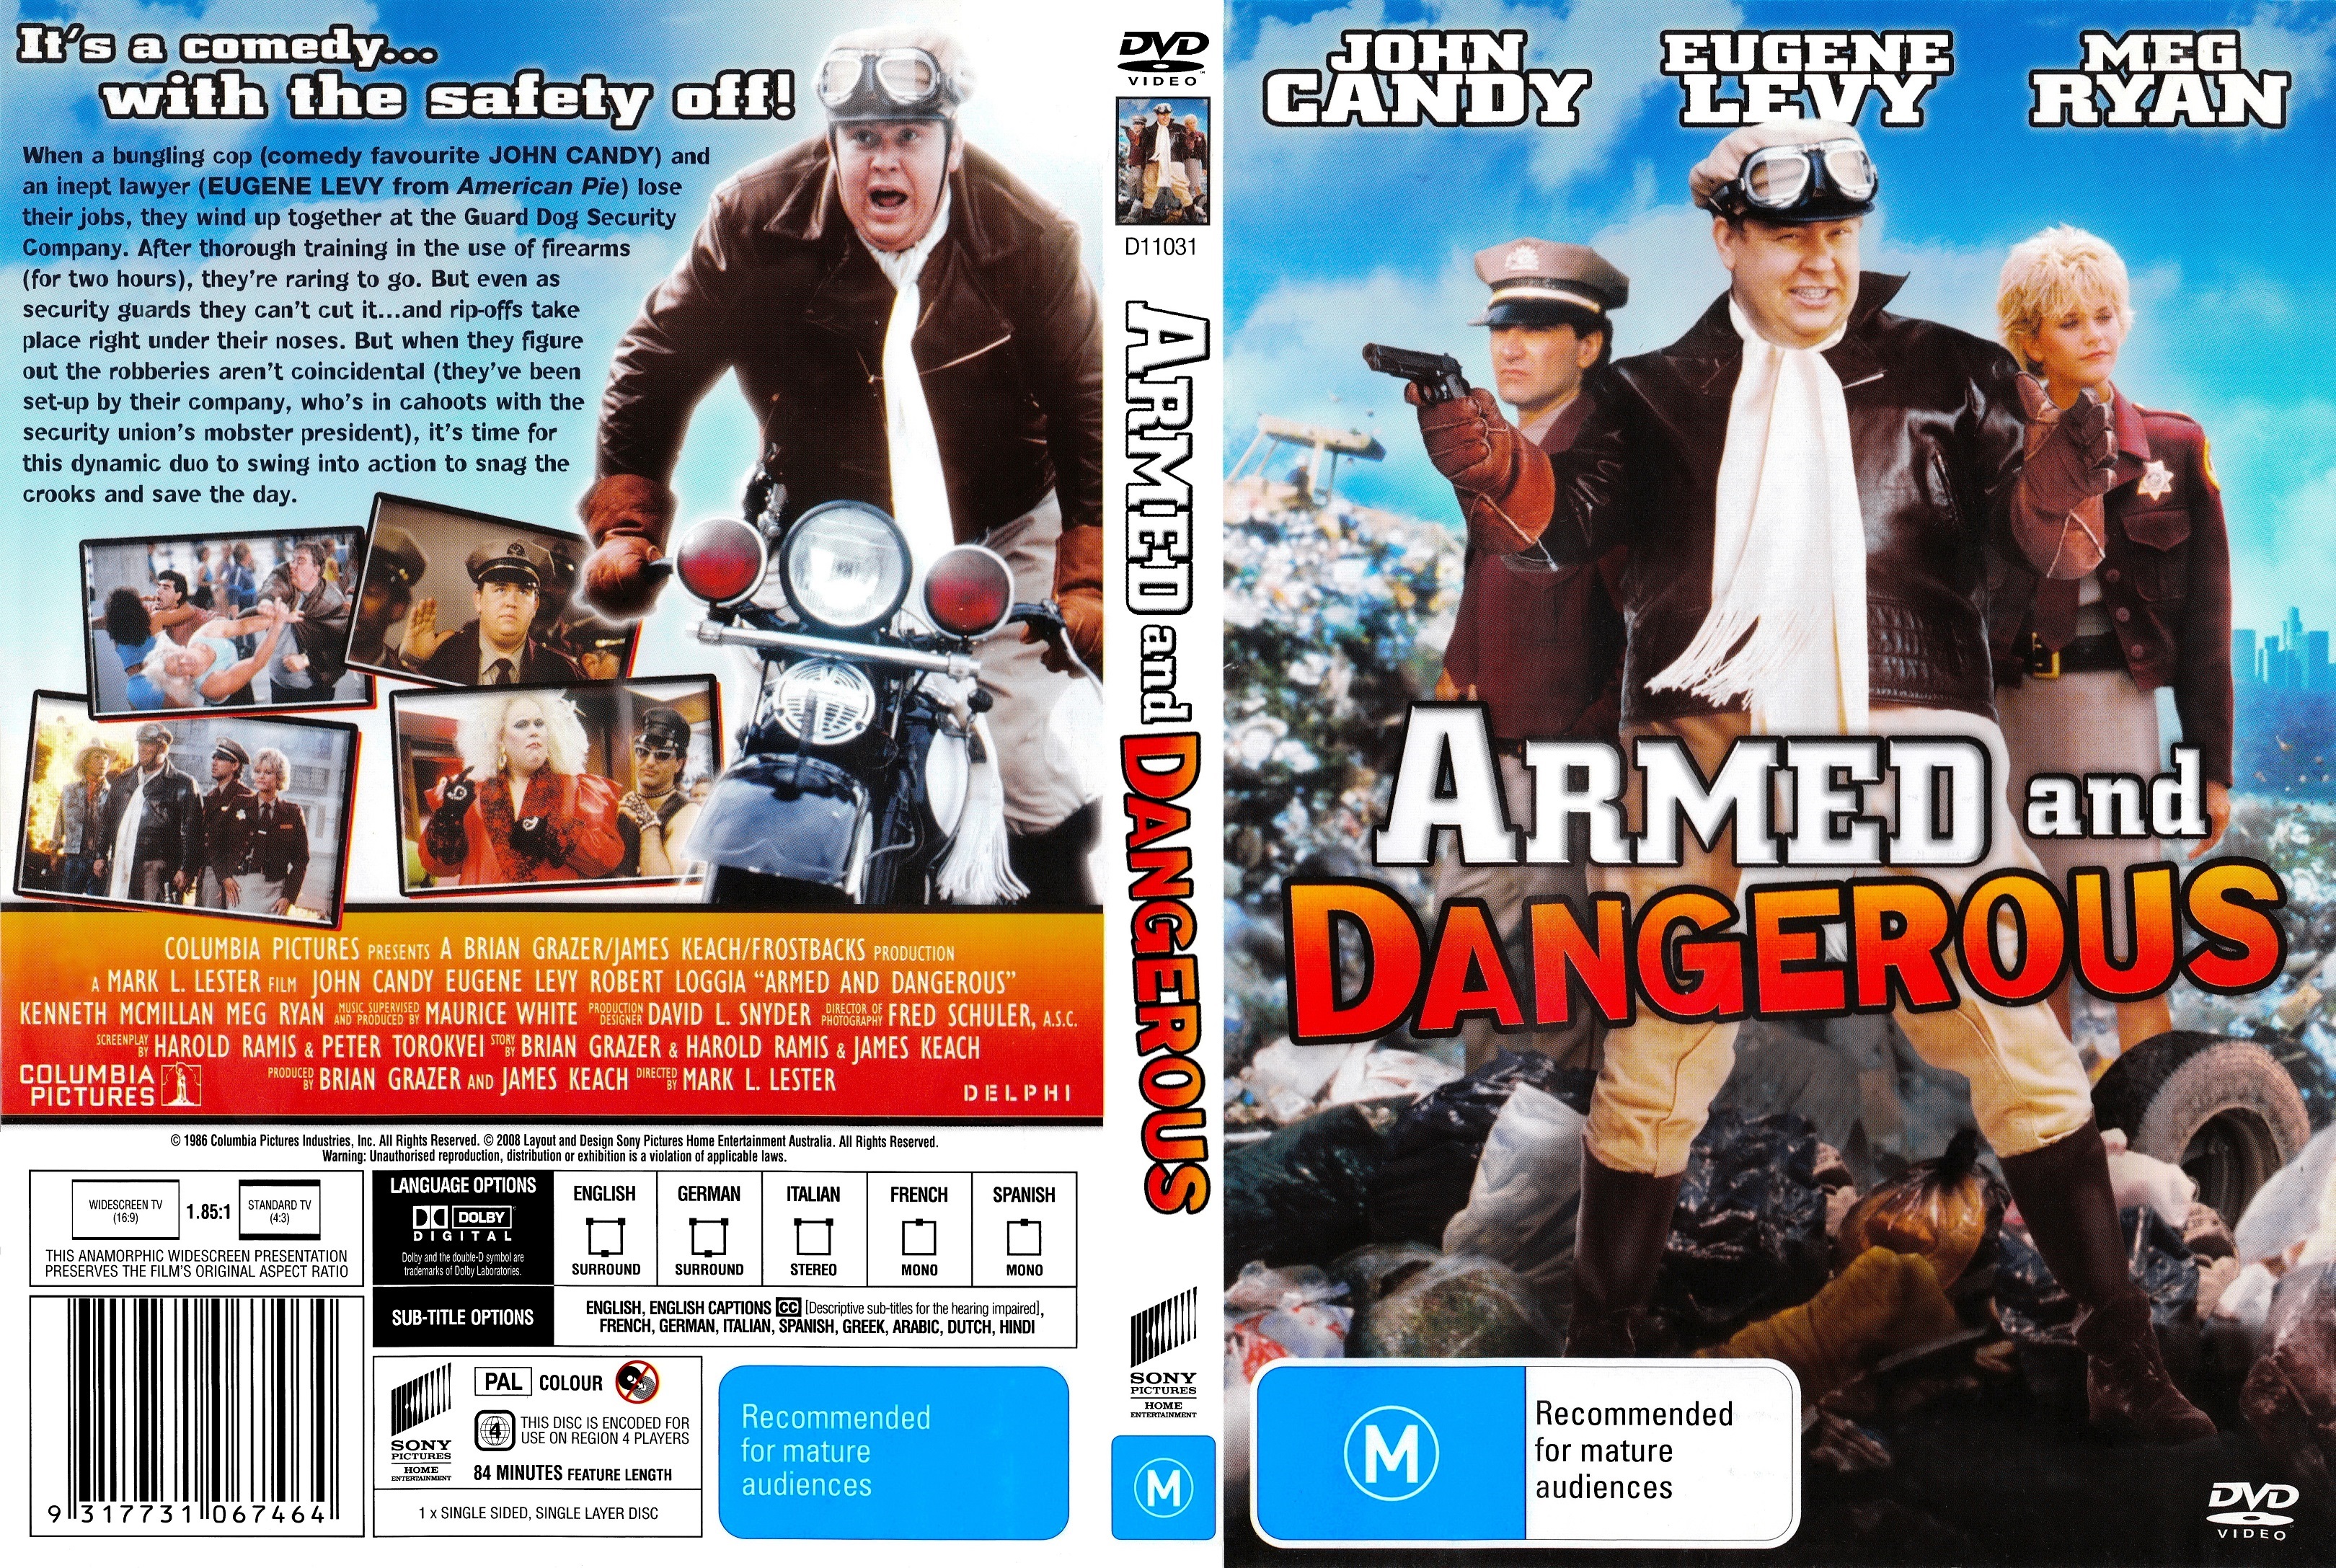 Armed.And.Dangerous.1986 John Candy